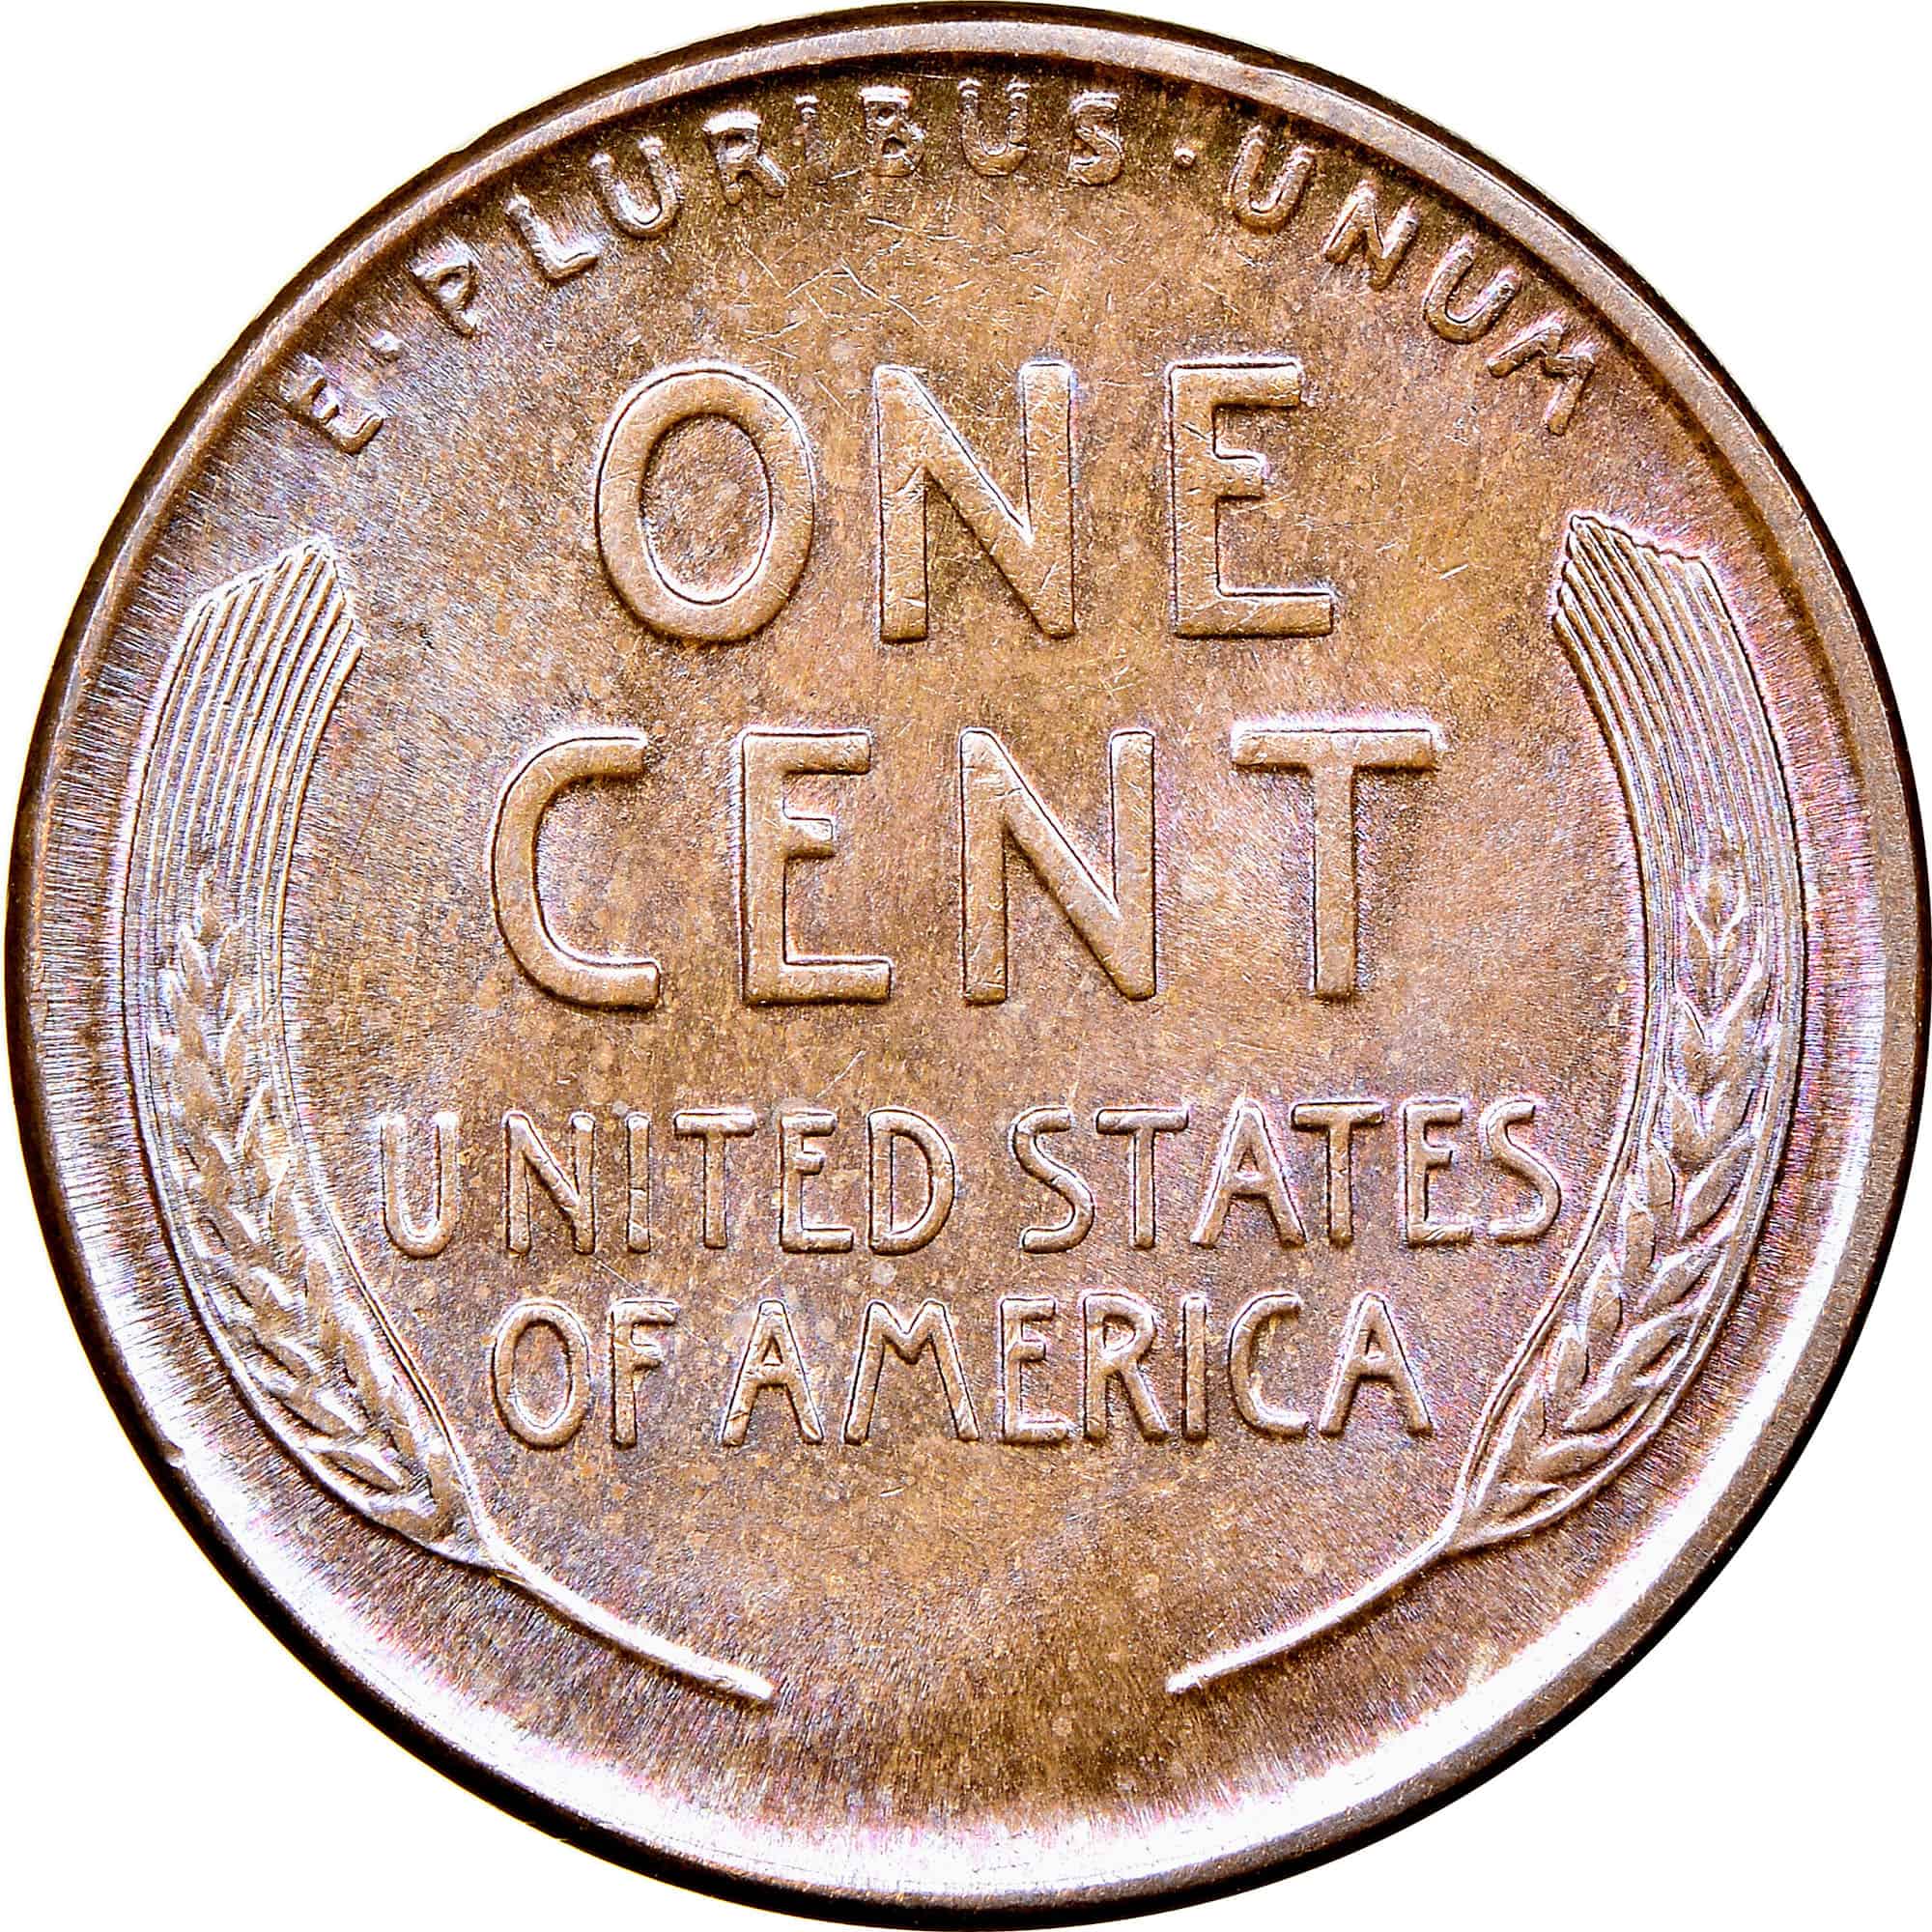 The reverse of the 1925 penny